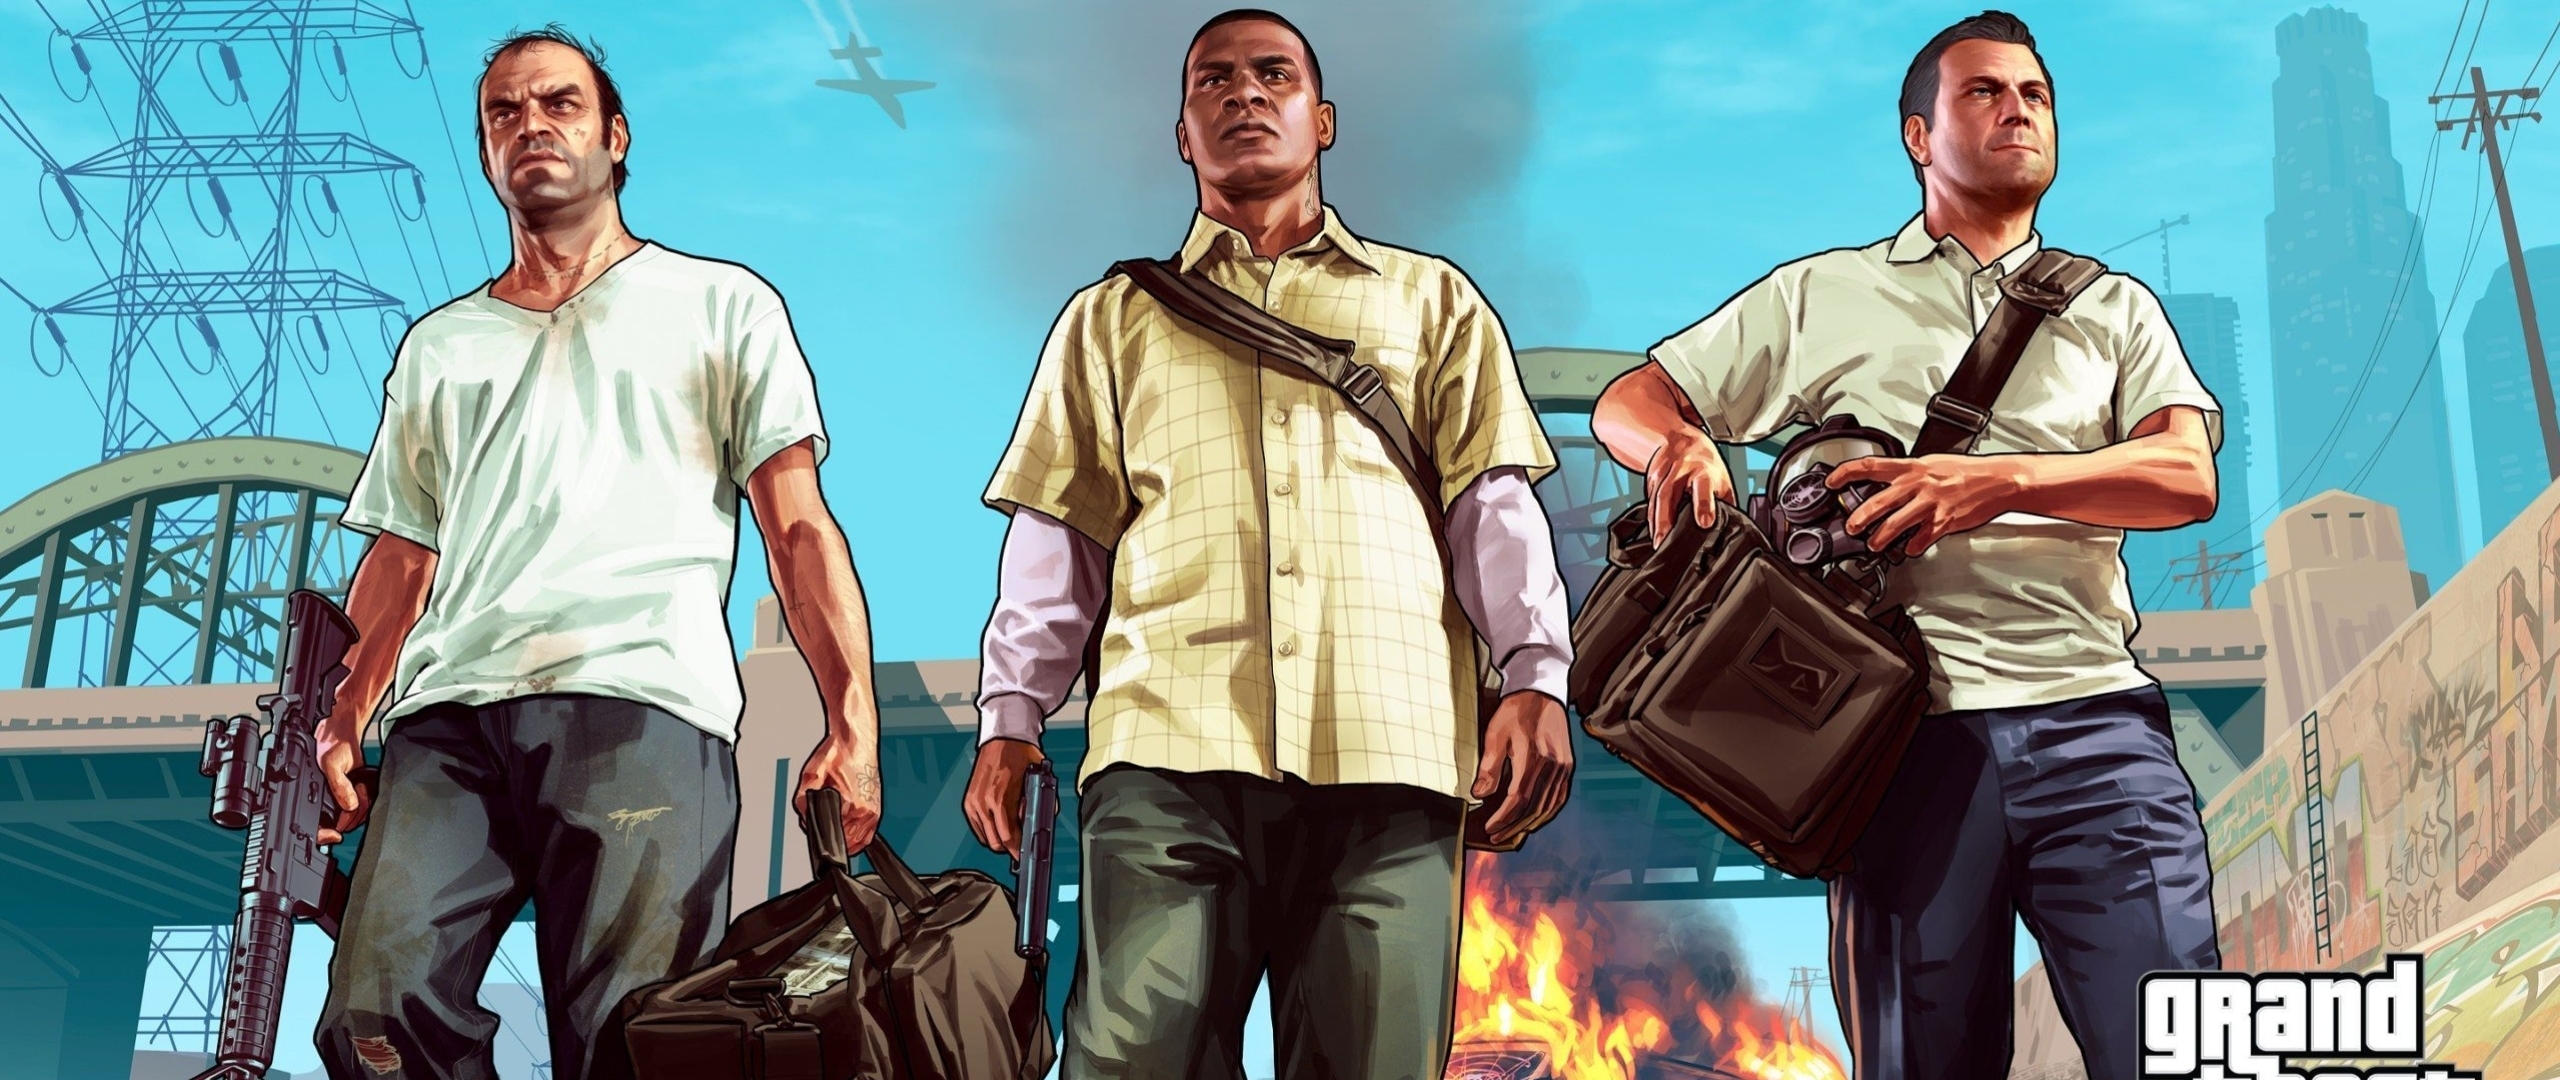 Gta 5 play for free now фото 119